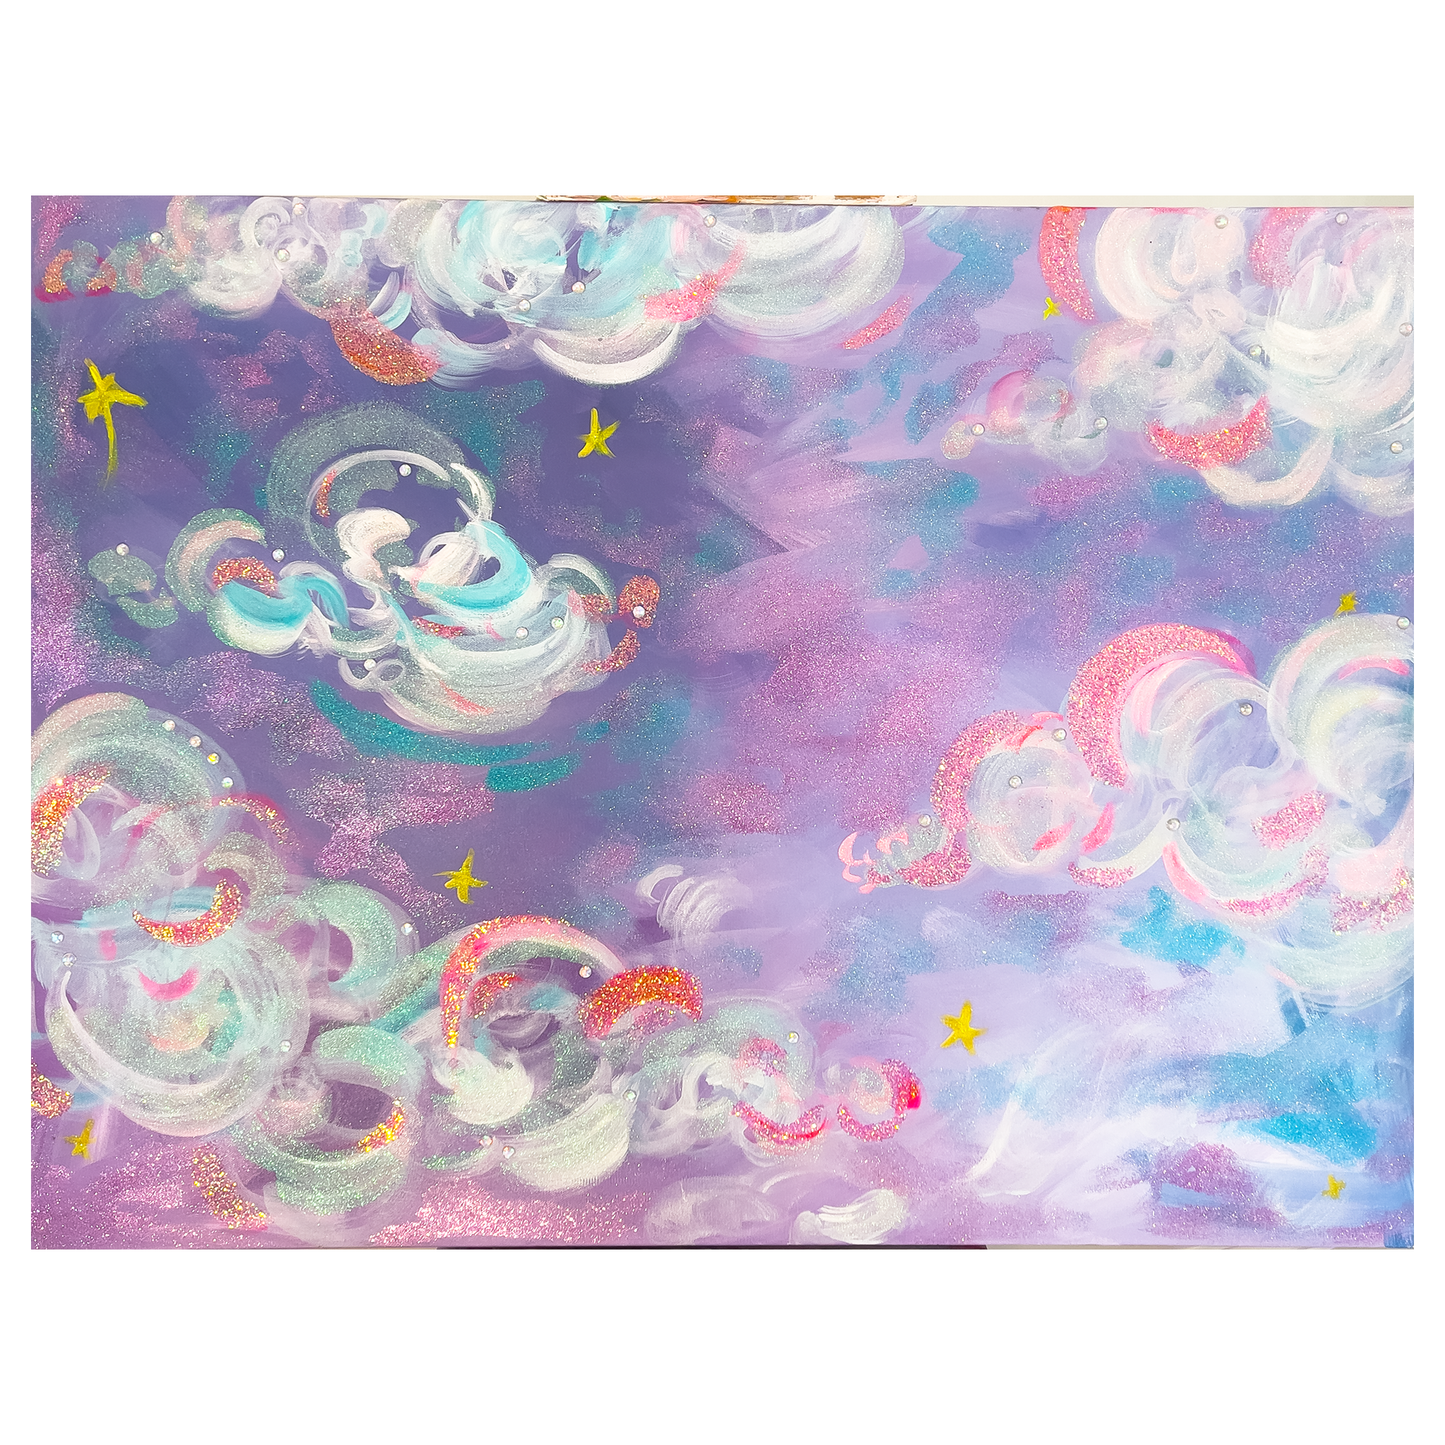 Cotton Candy Clouds Painting